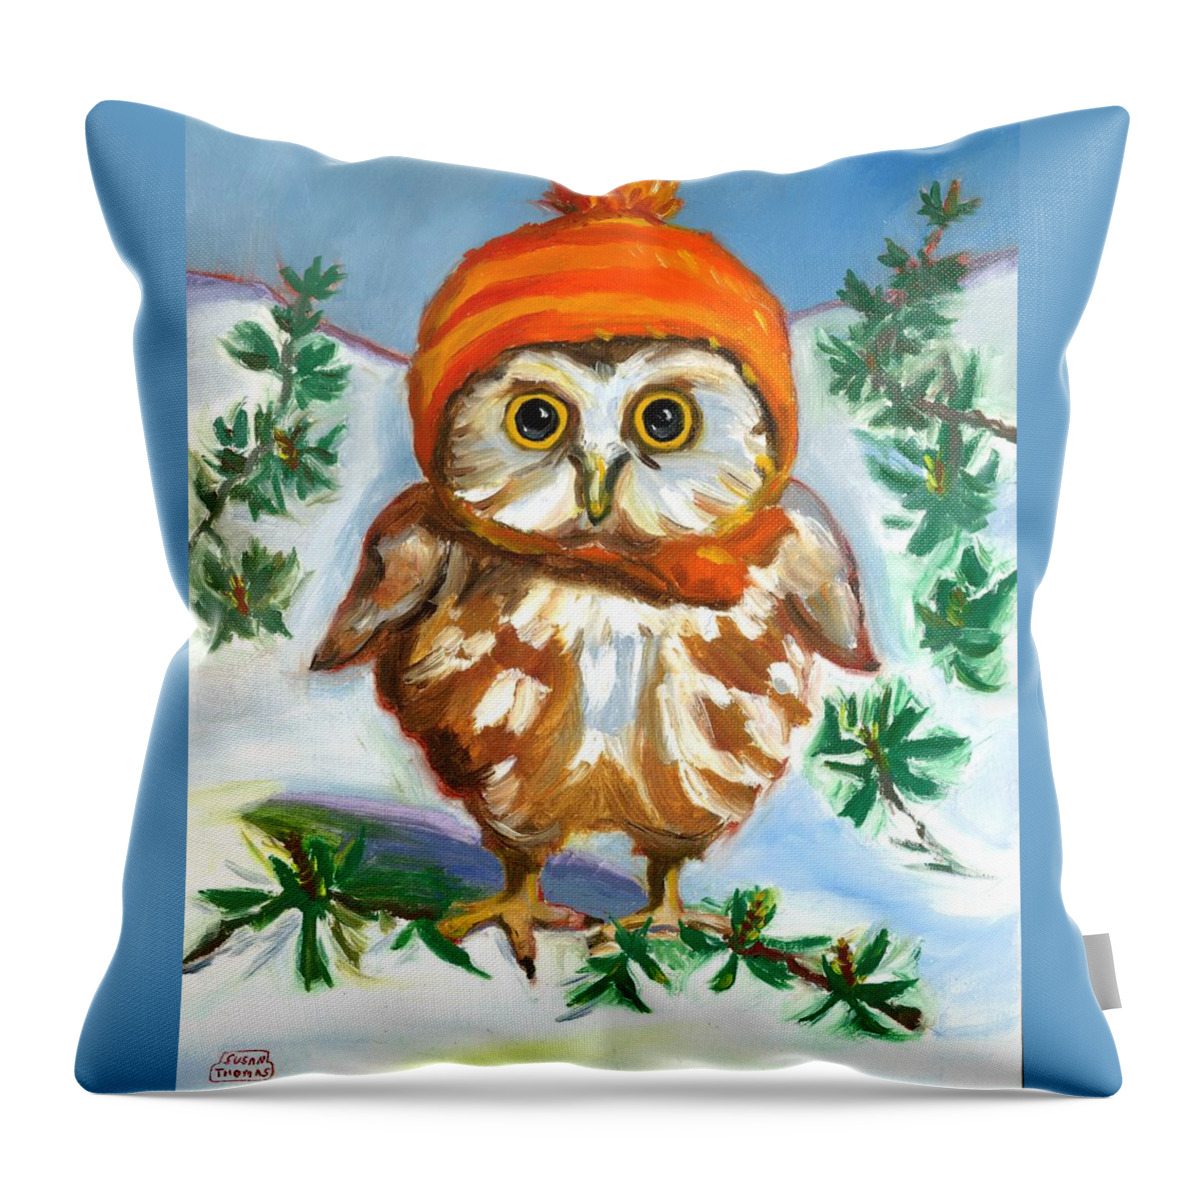 Owl Throw Pillow featuring the painting Owl in Orange Hat by Susan Thomas